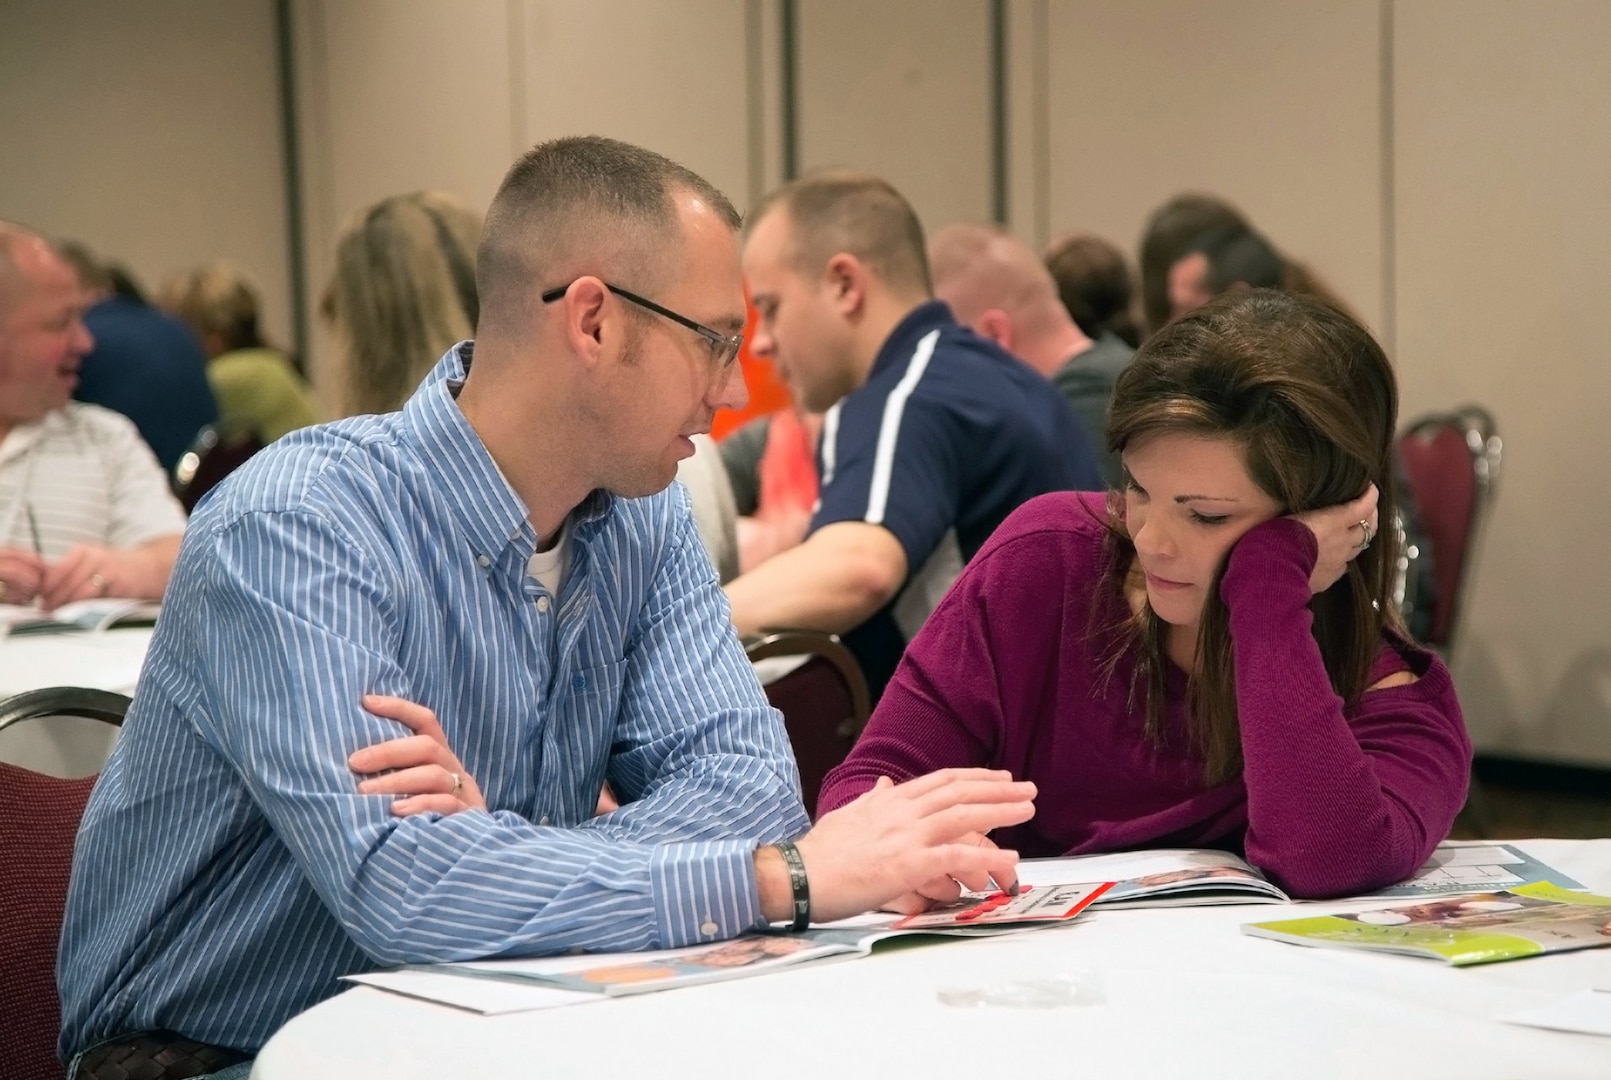 Sgt. Matt Phillippe participates in a discussion with his wife, Samantha Phillippe, during a Strong Bonds retreat Feb. 9. The two-day event focused on relationship education.